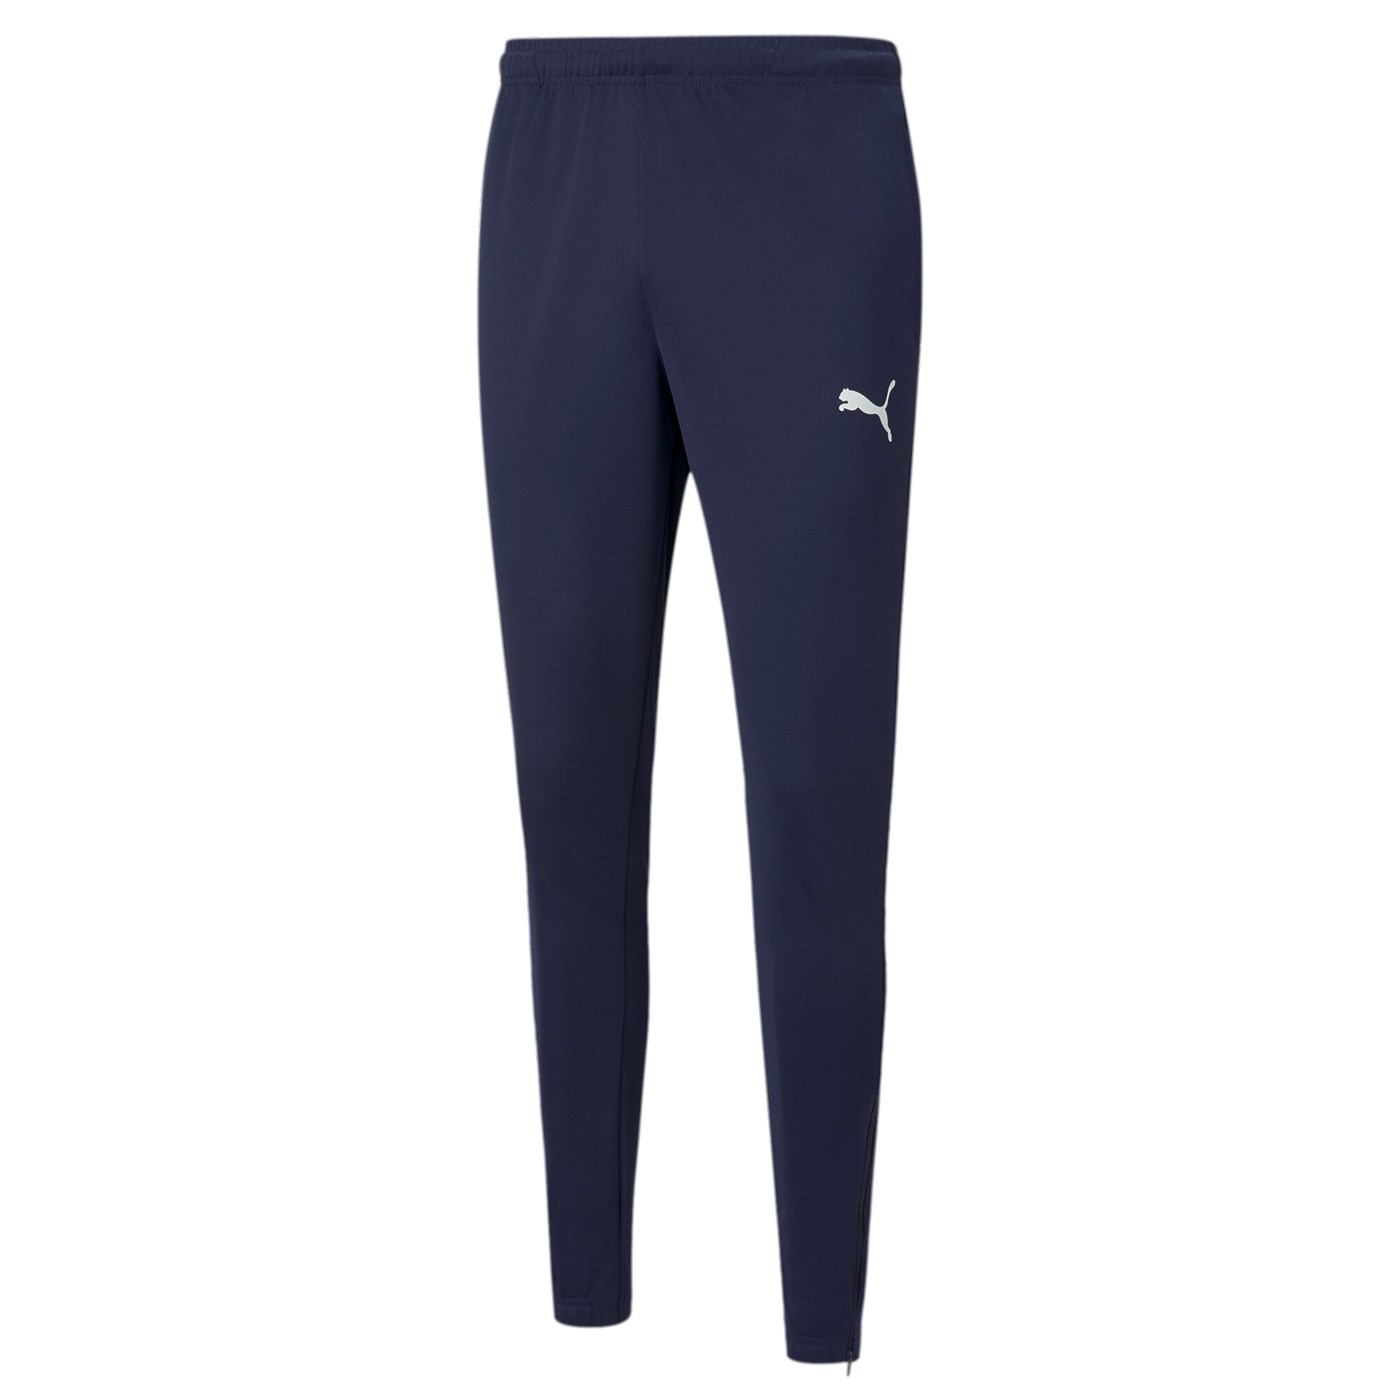 teamRISE Poly Training Pants 657390